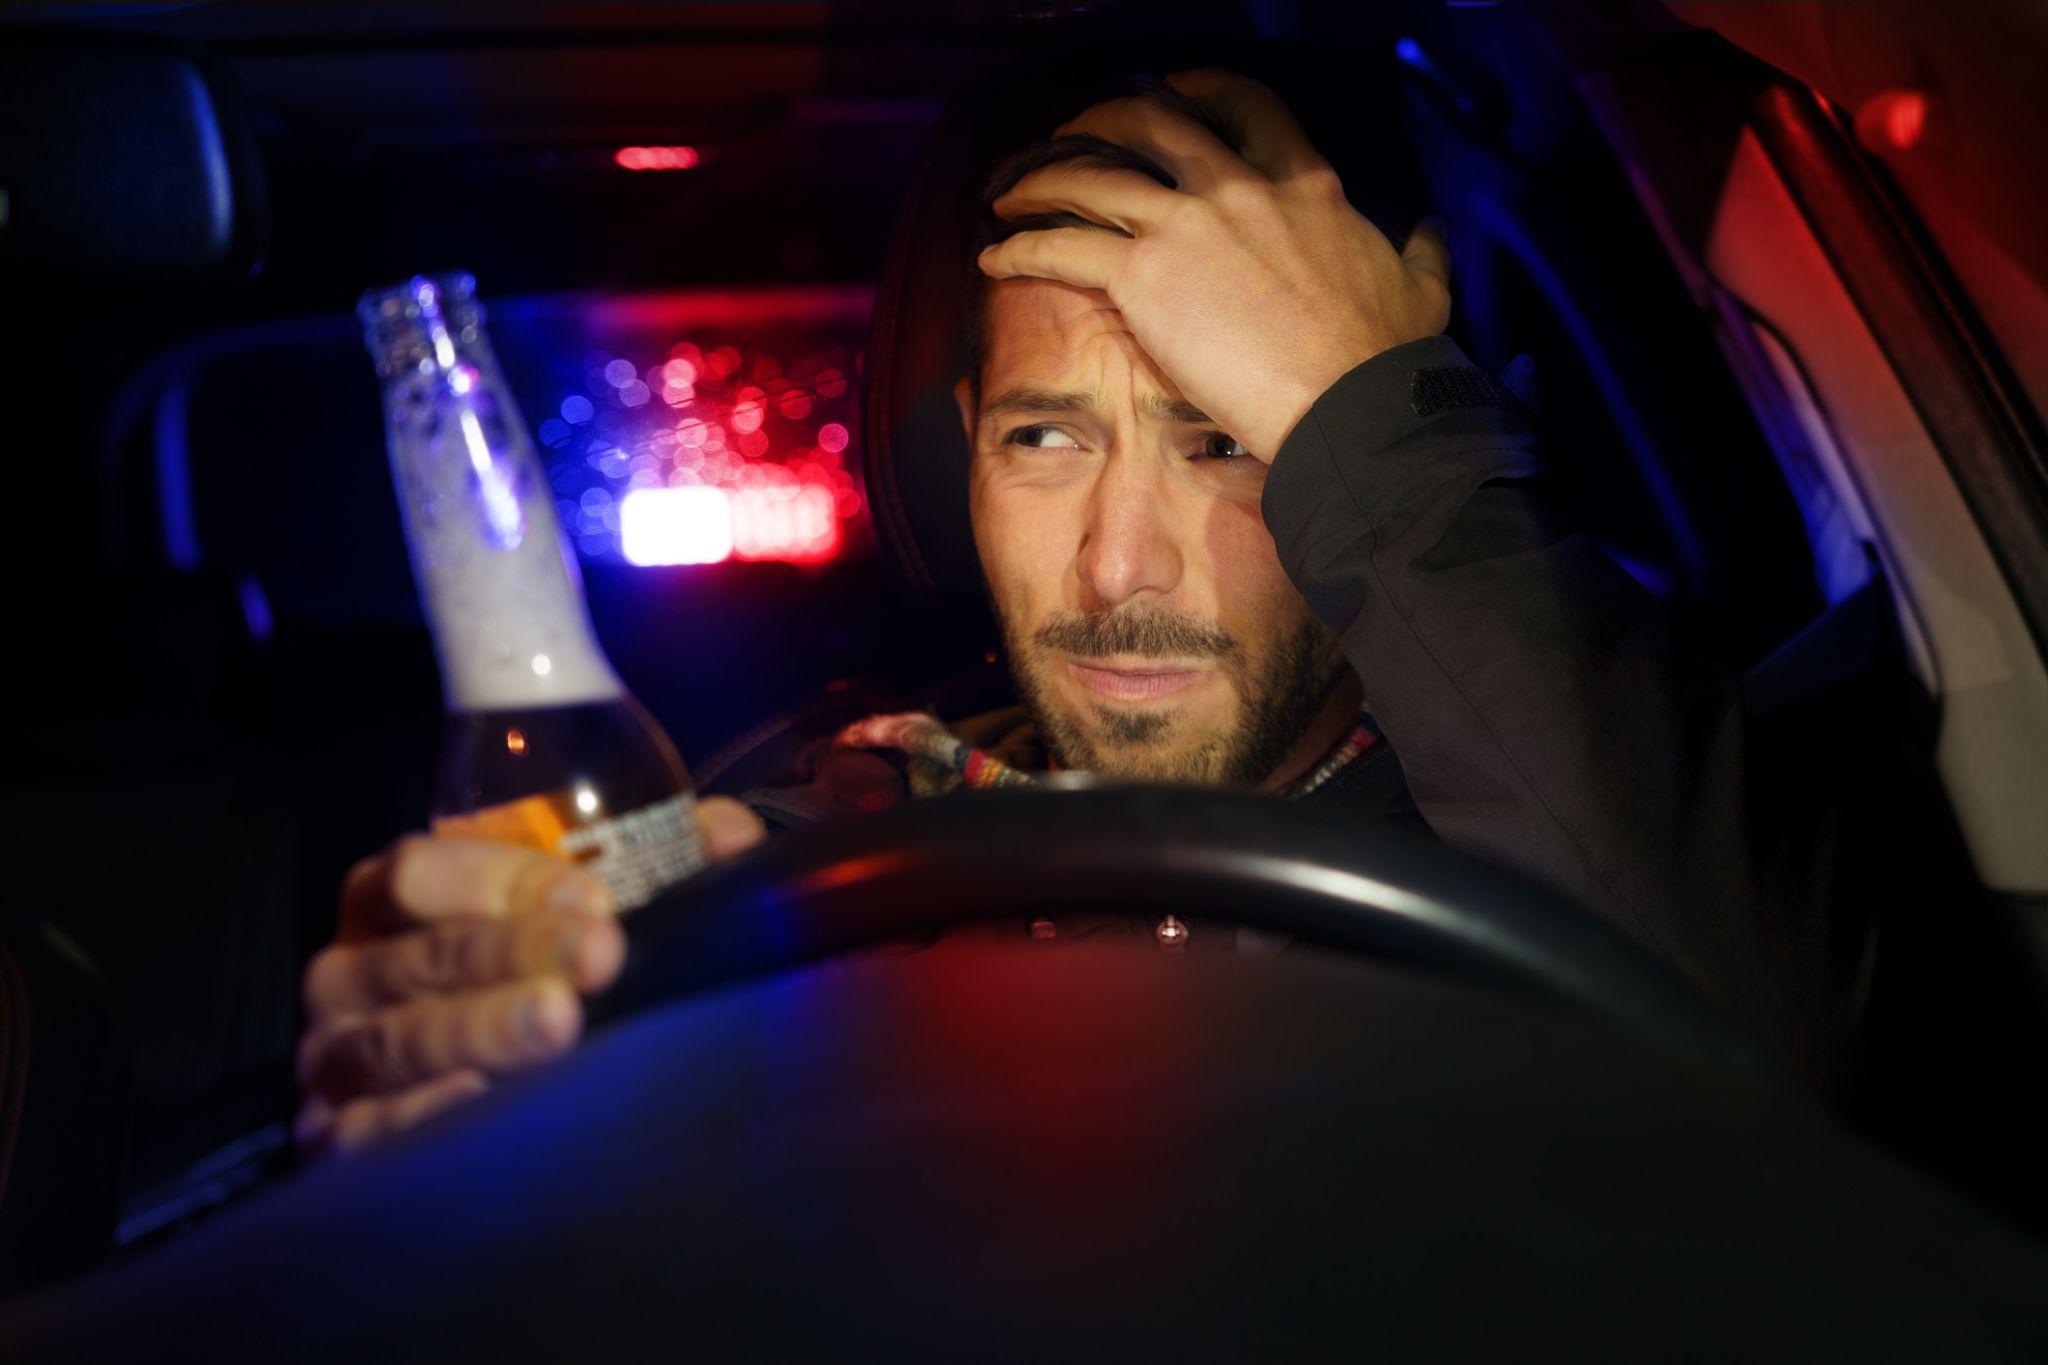 Man holding an open beer bottle while sitting behind the wheel of a car. He looks exasperated as red and blue lights flash behind him.